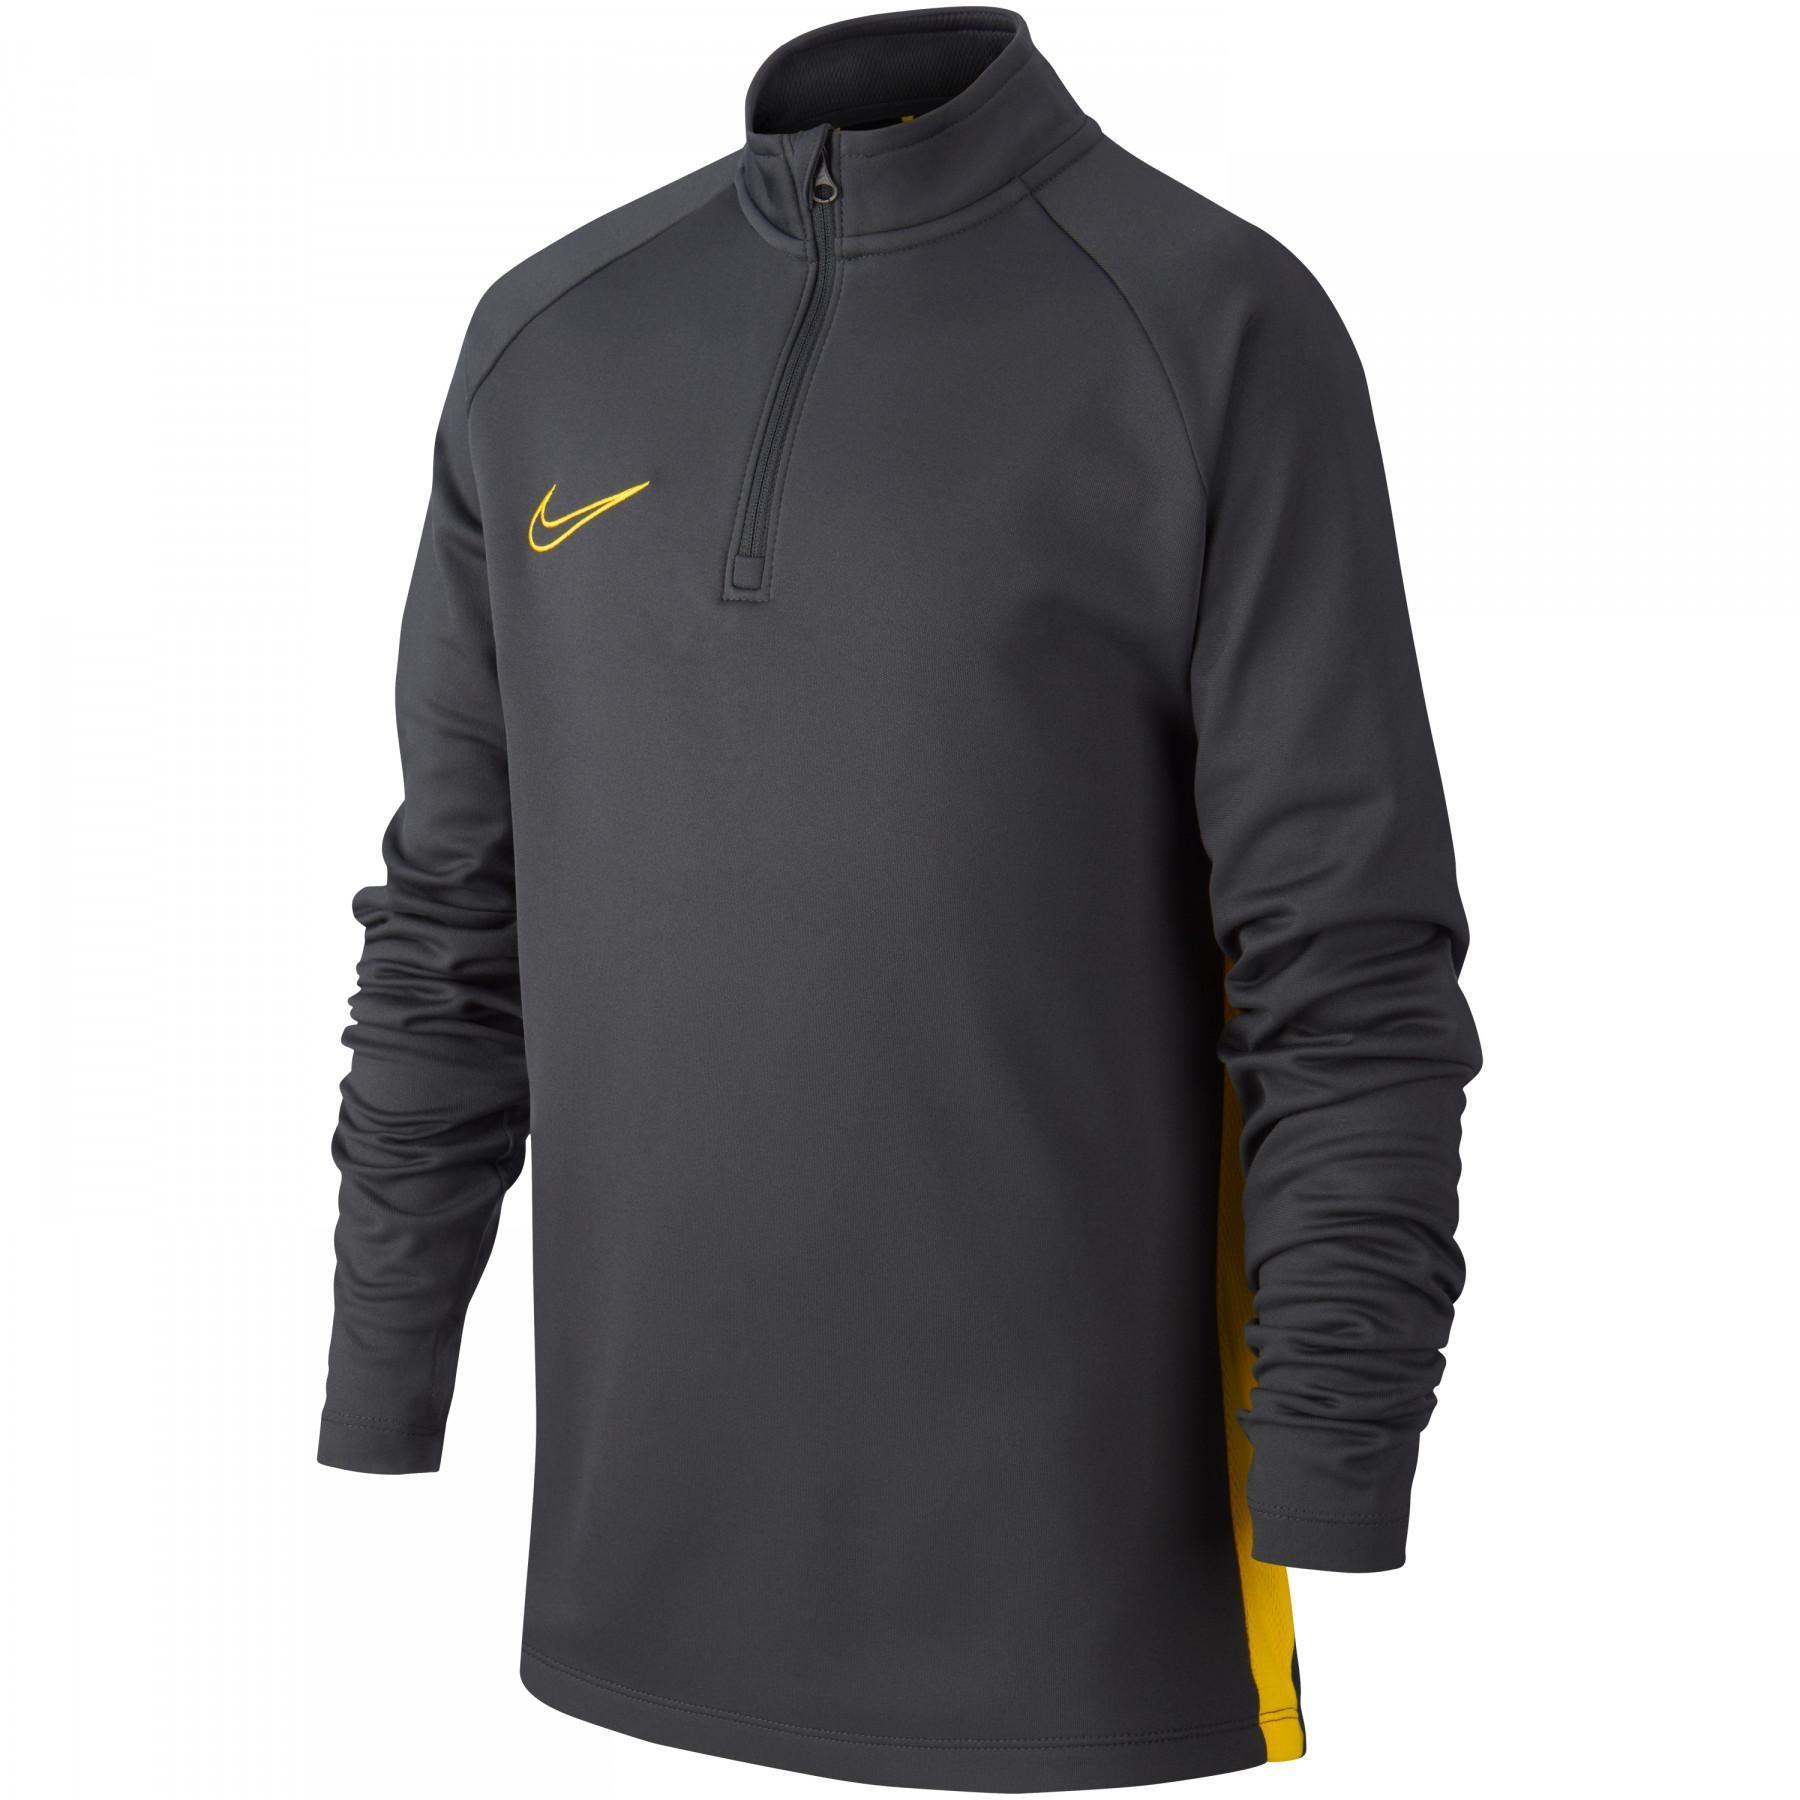 Training top enfant Nike Dry-FIT Academy